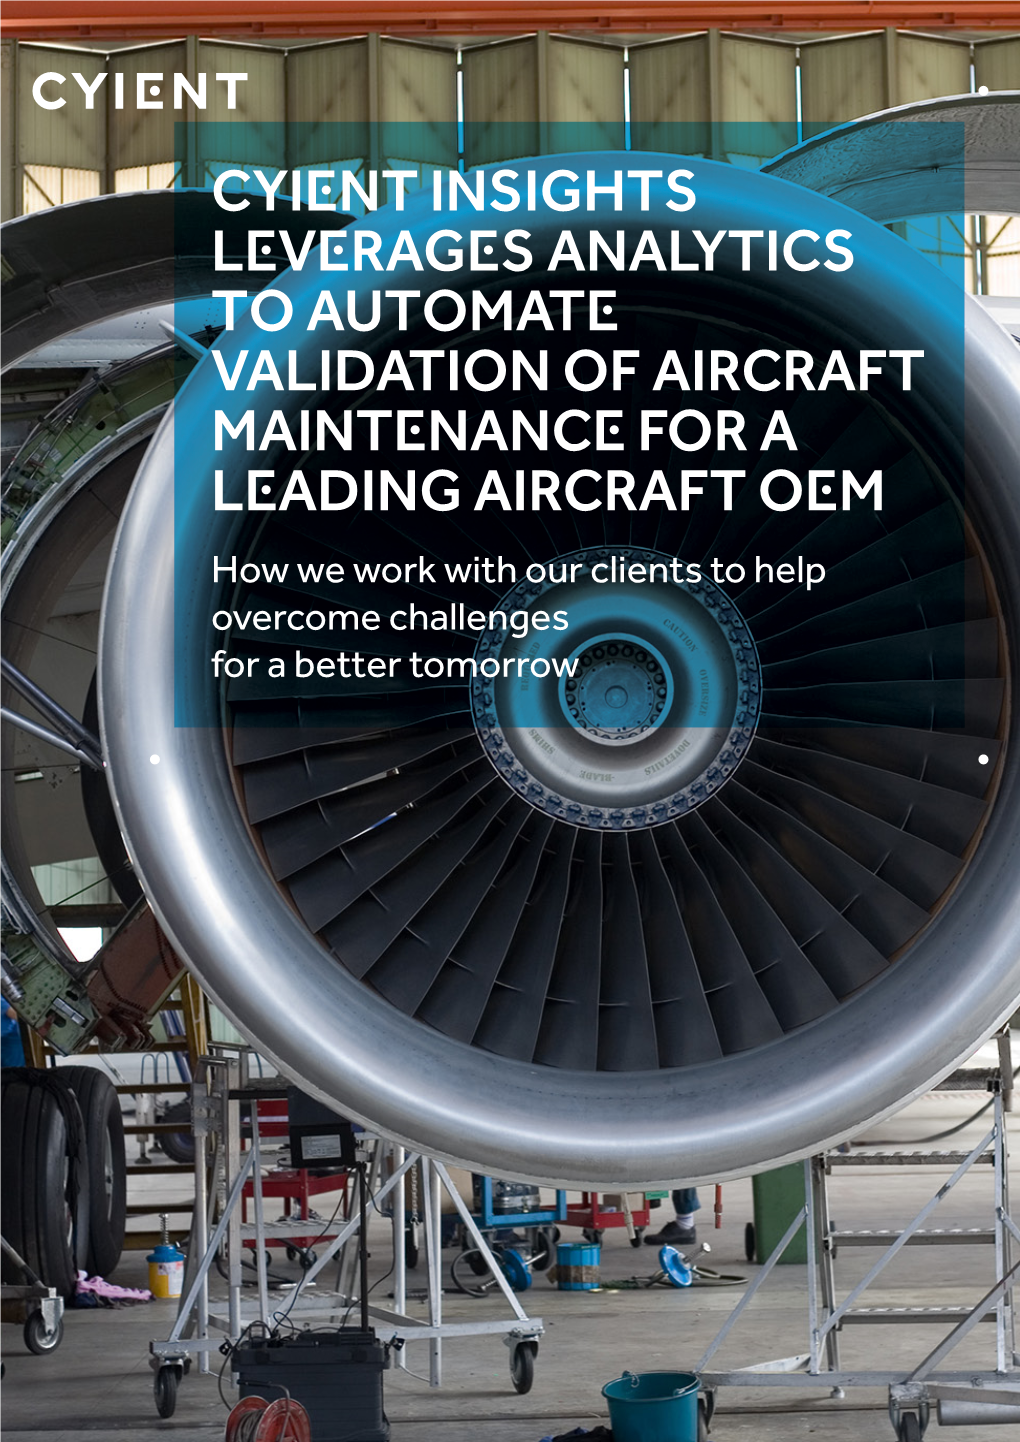 Cyient Insights Leverages Analytics to Automate Validation of Aircraft